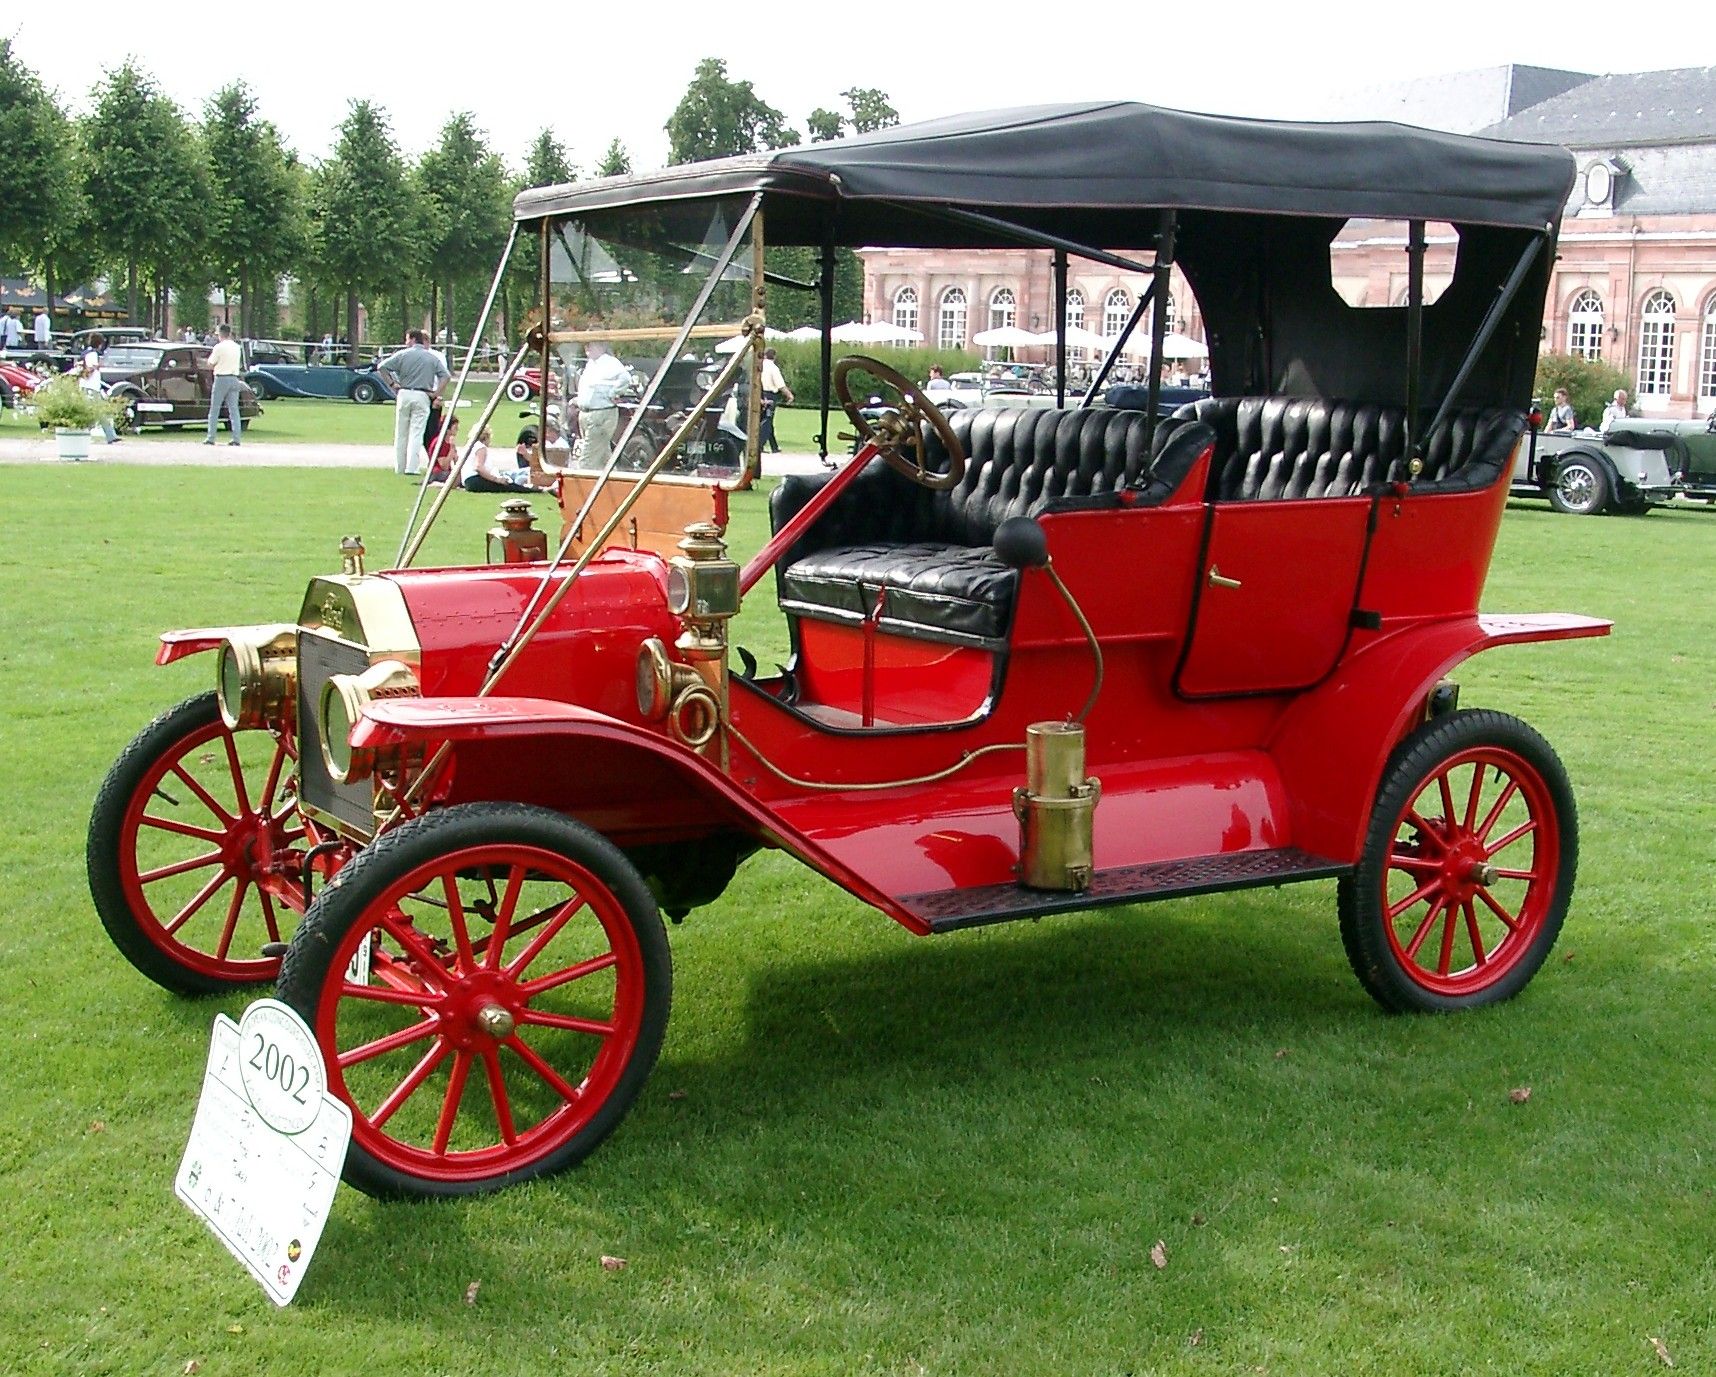 The 1908 Ford Model T.